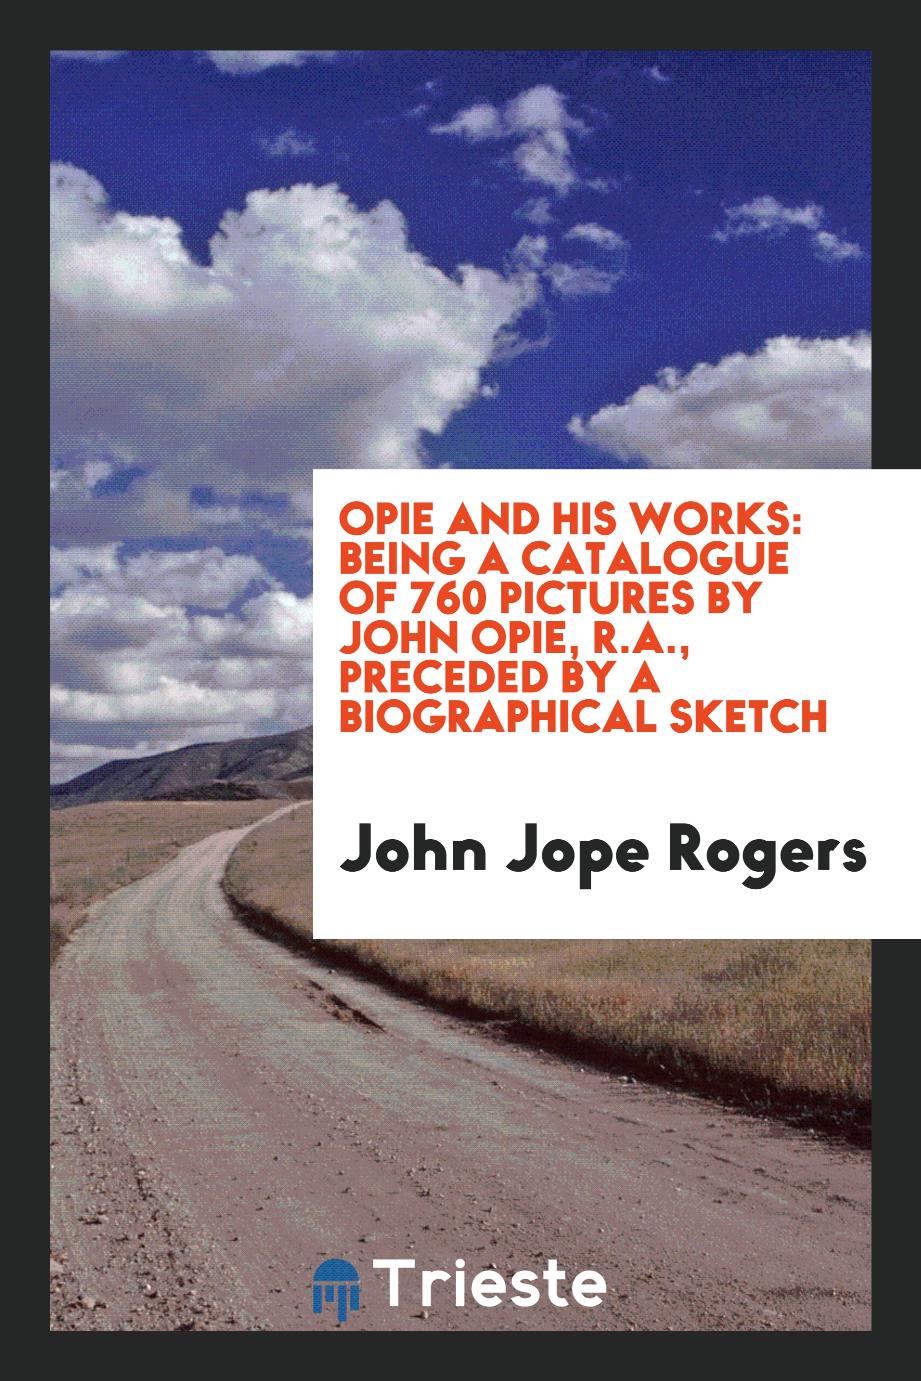 Opie and his works: being a catalogue of 760 pictures by John Opie, R.A., preceded by a biographical sketch